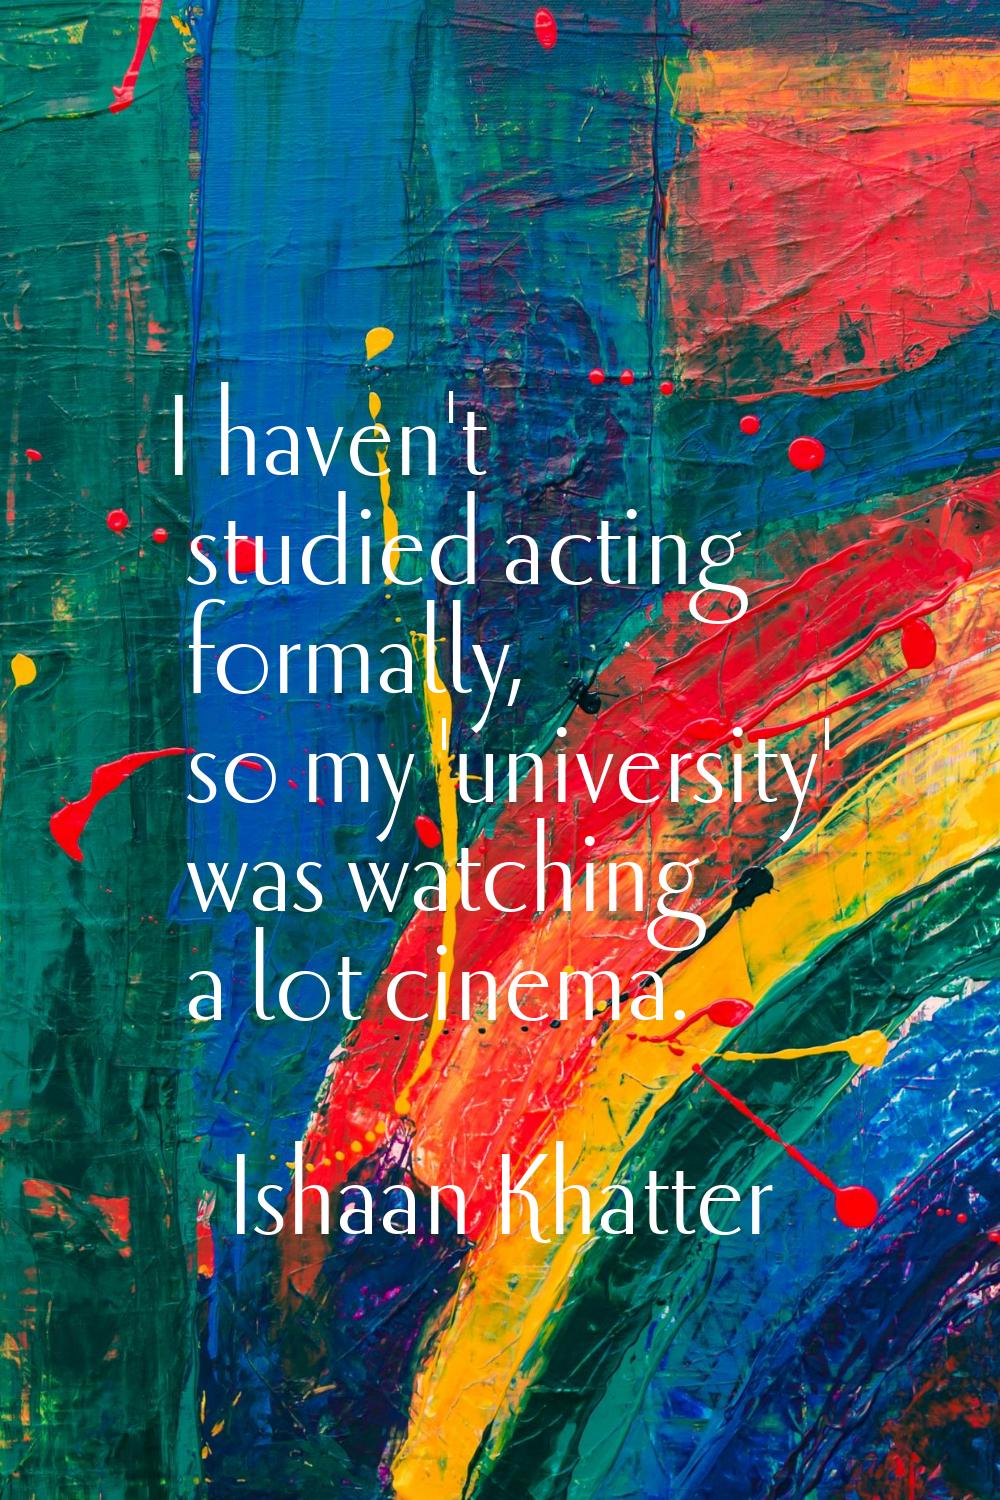 I haven't studied acting formally, so my 'university' was watching a lot cinema.